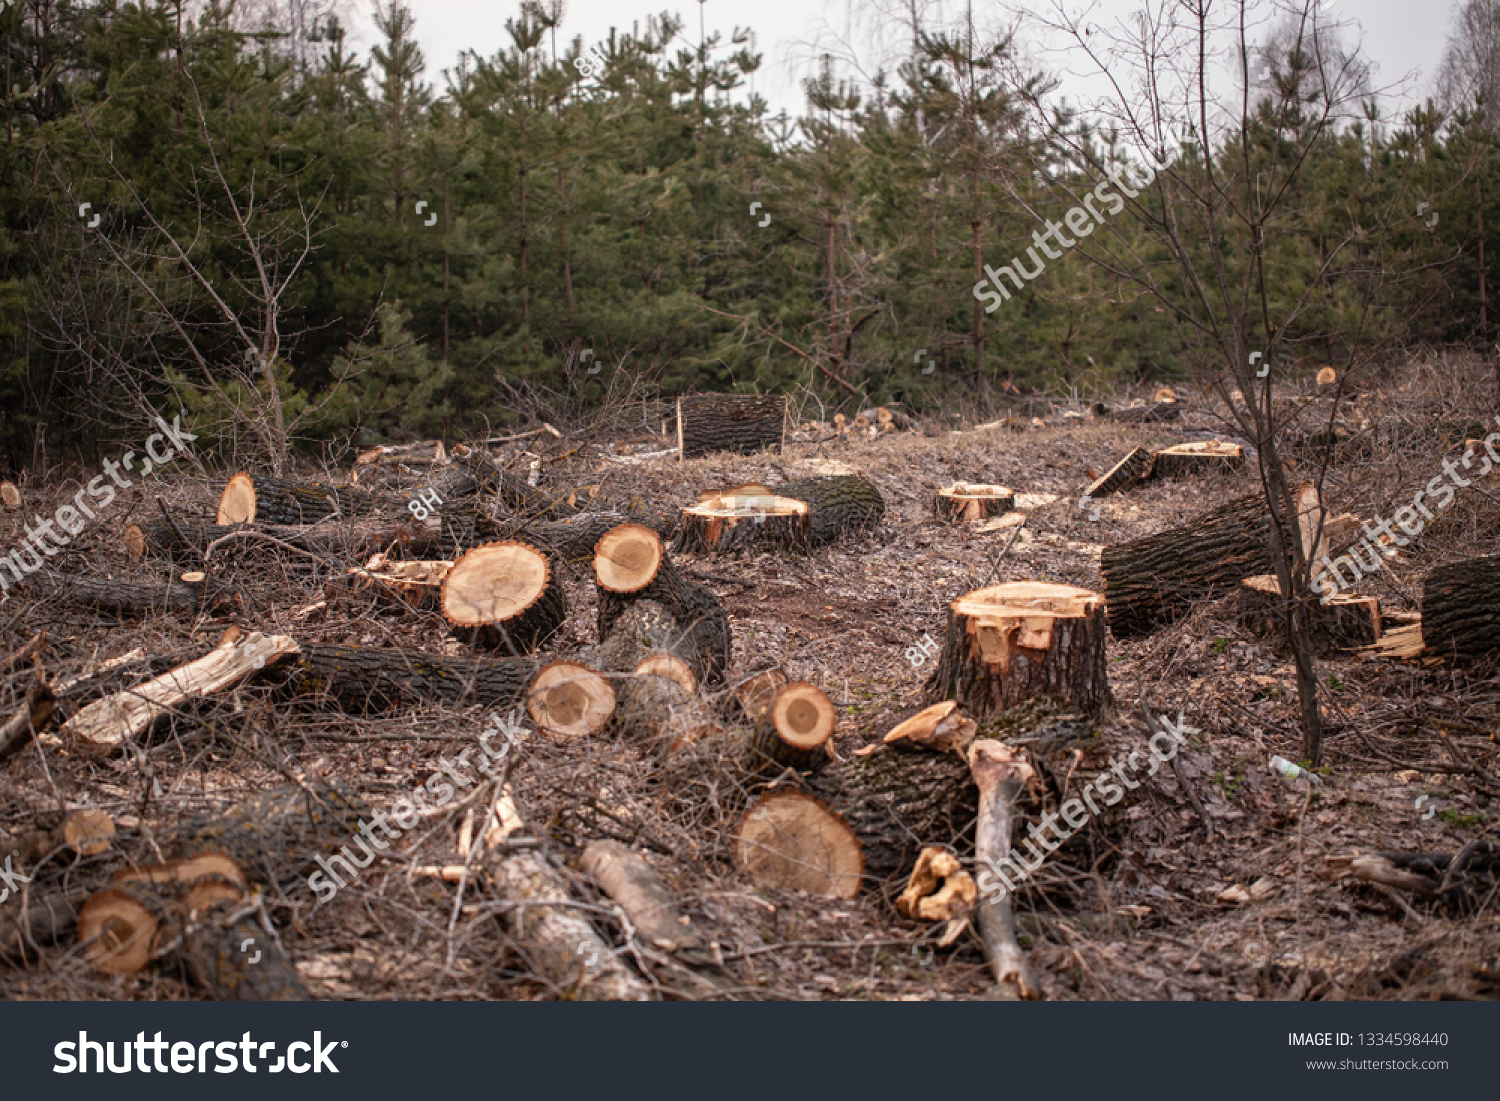 Deforestation, forest clearing #1334598440